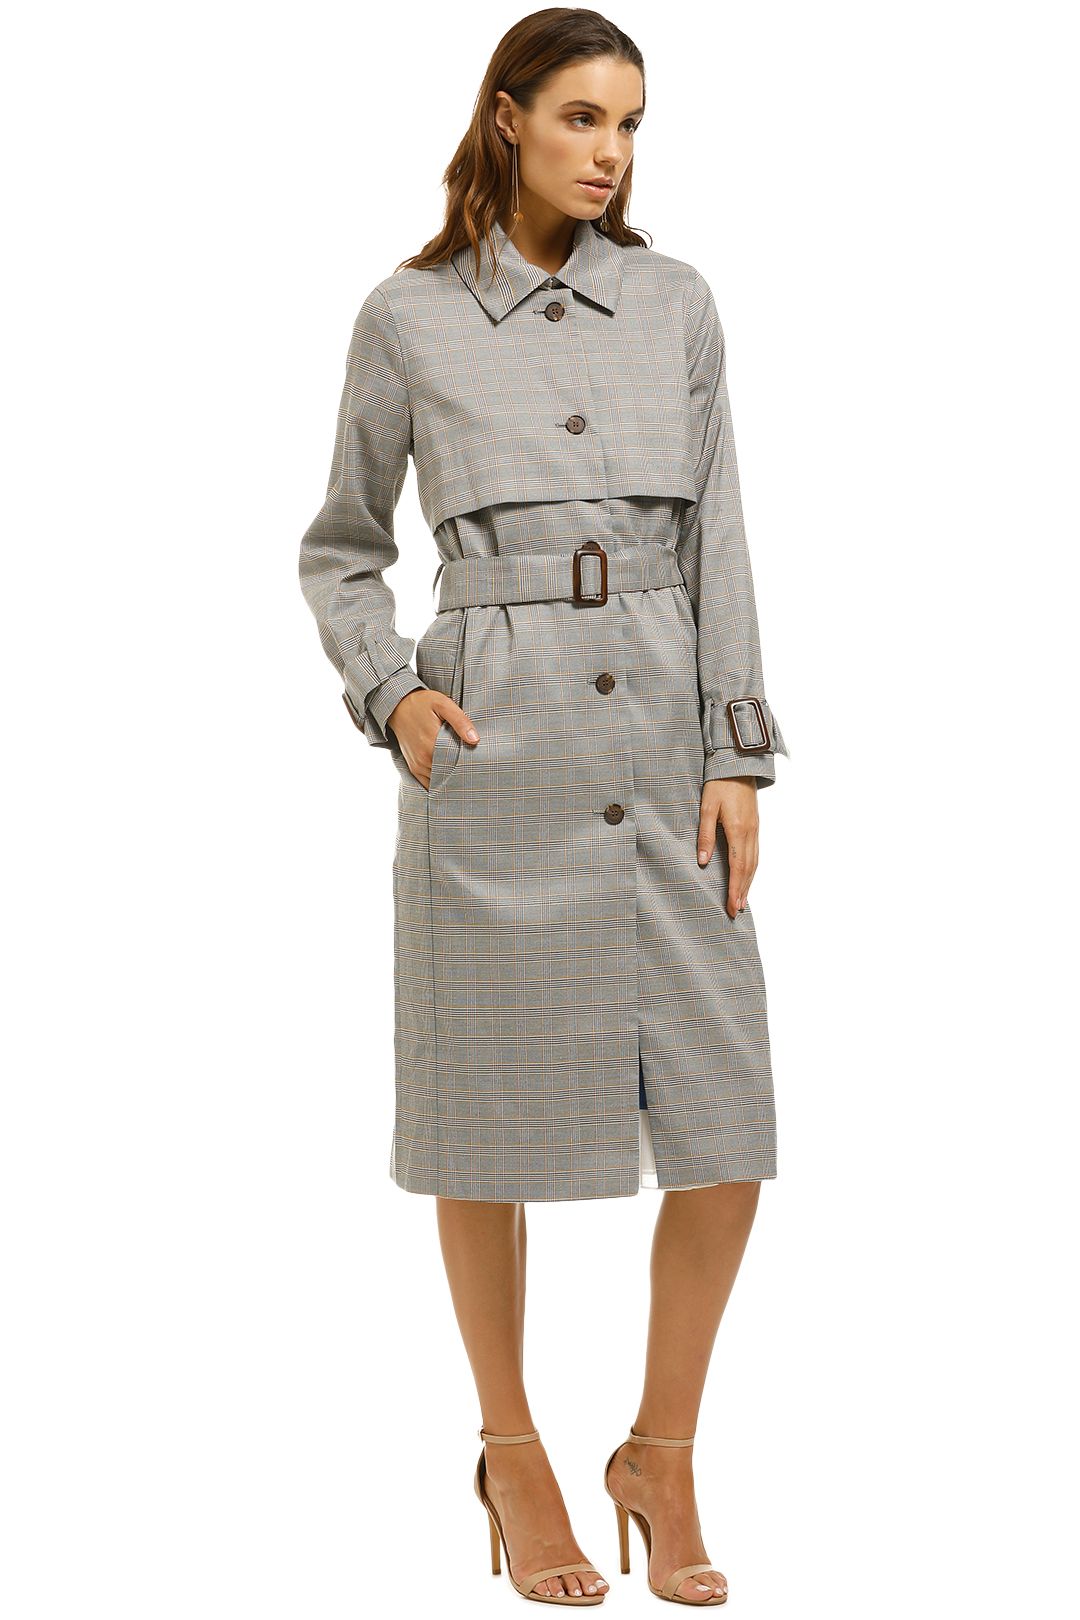 Iris-and-Ink-Prince-Of-Wales-Check-Woven-Trench-Coat-Grey-Side